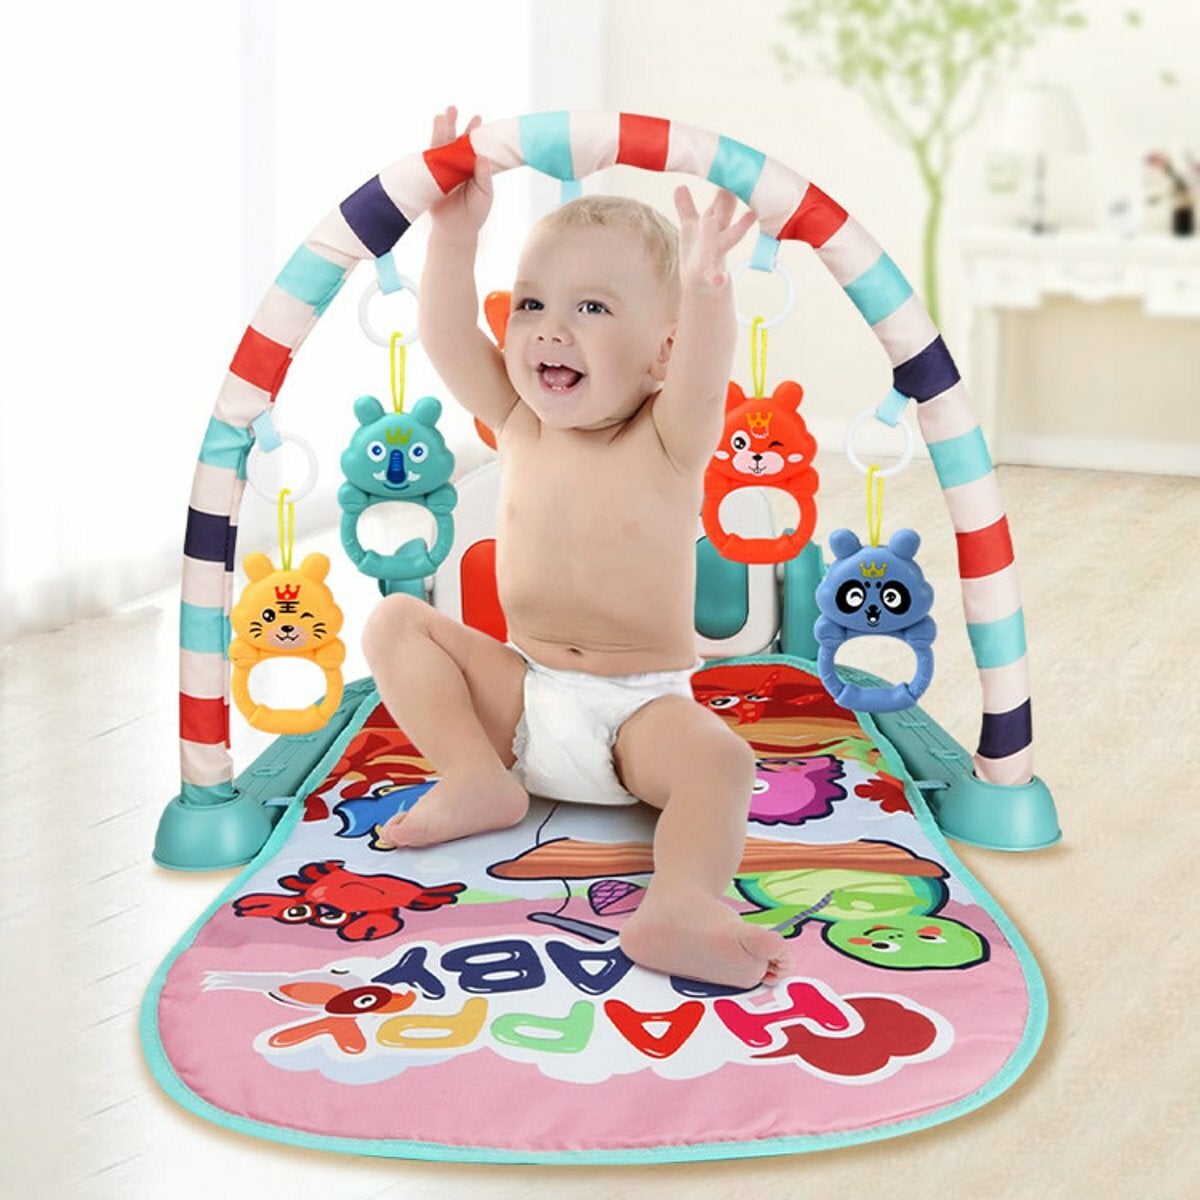 76*56*43CM 2 IN 1 Multi-functional Baby Gym with Play Mat Keyboard Soft Light Rattle Toys for Baby Gift